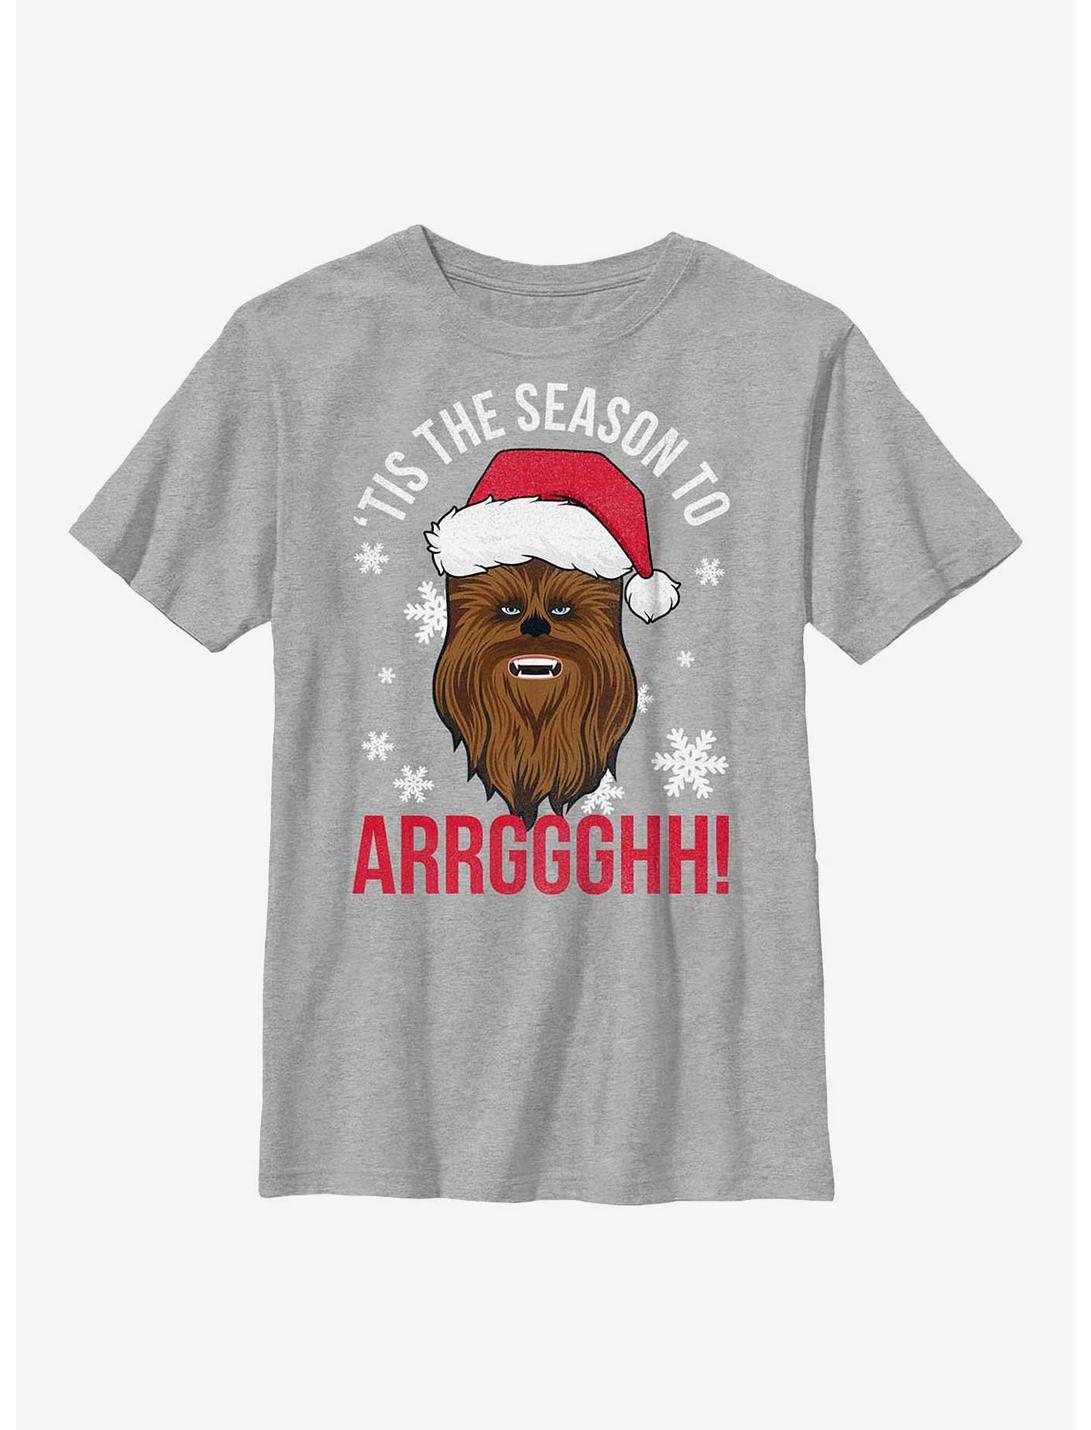 Star Wars 'Tis The Season To ARRGGHH! Youth T-Shirt, ATH HTR, hi-res